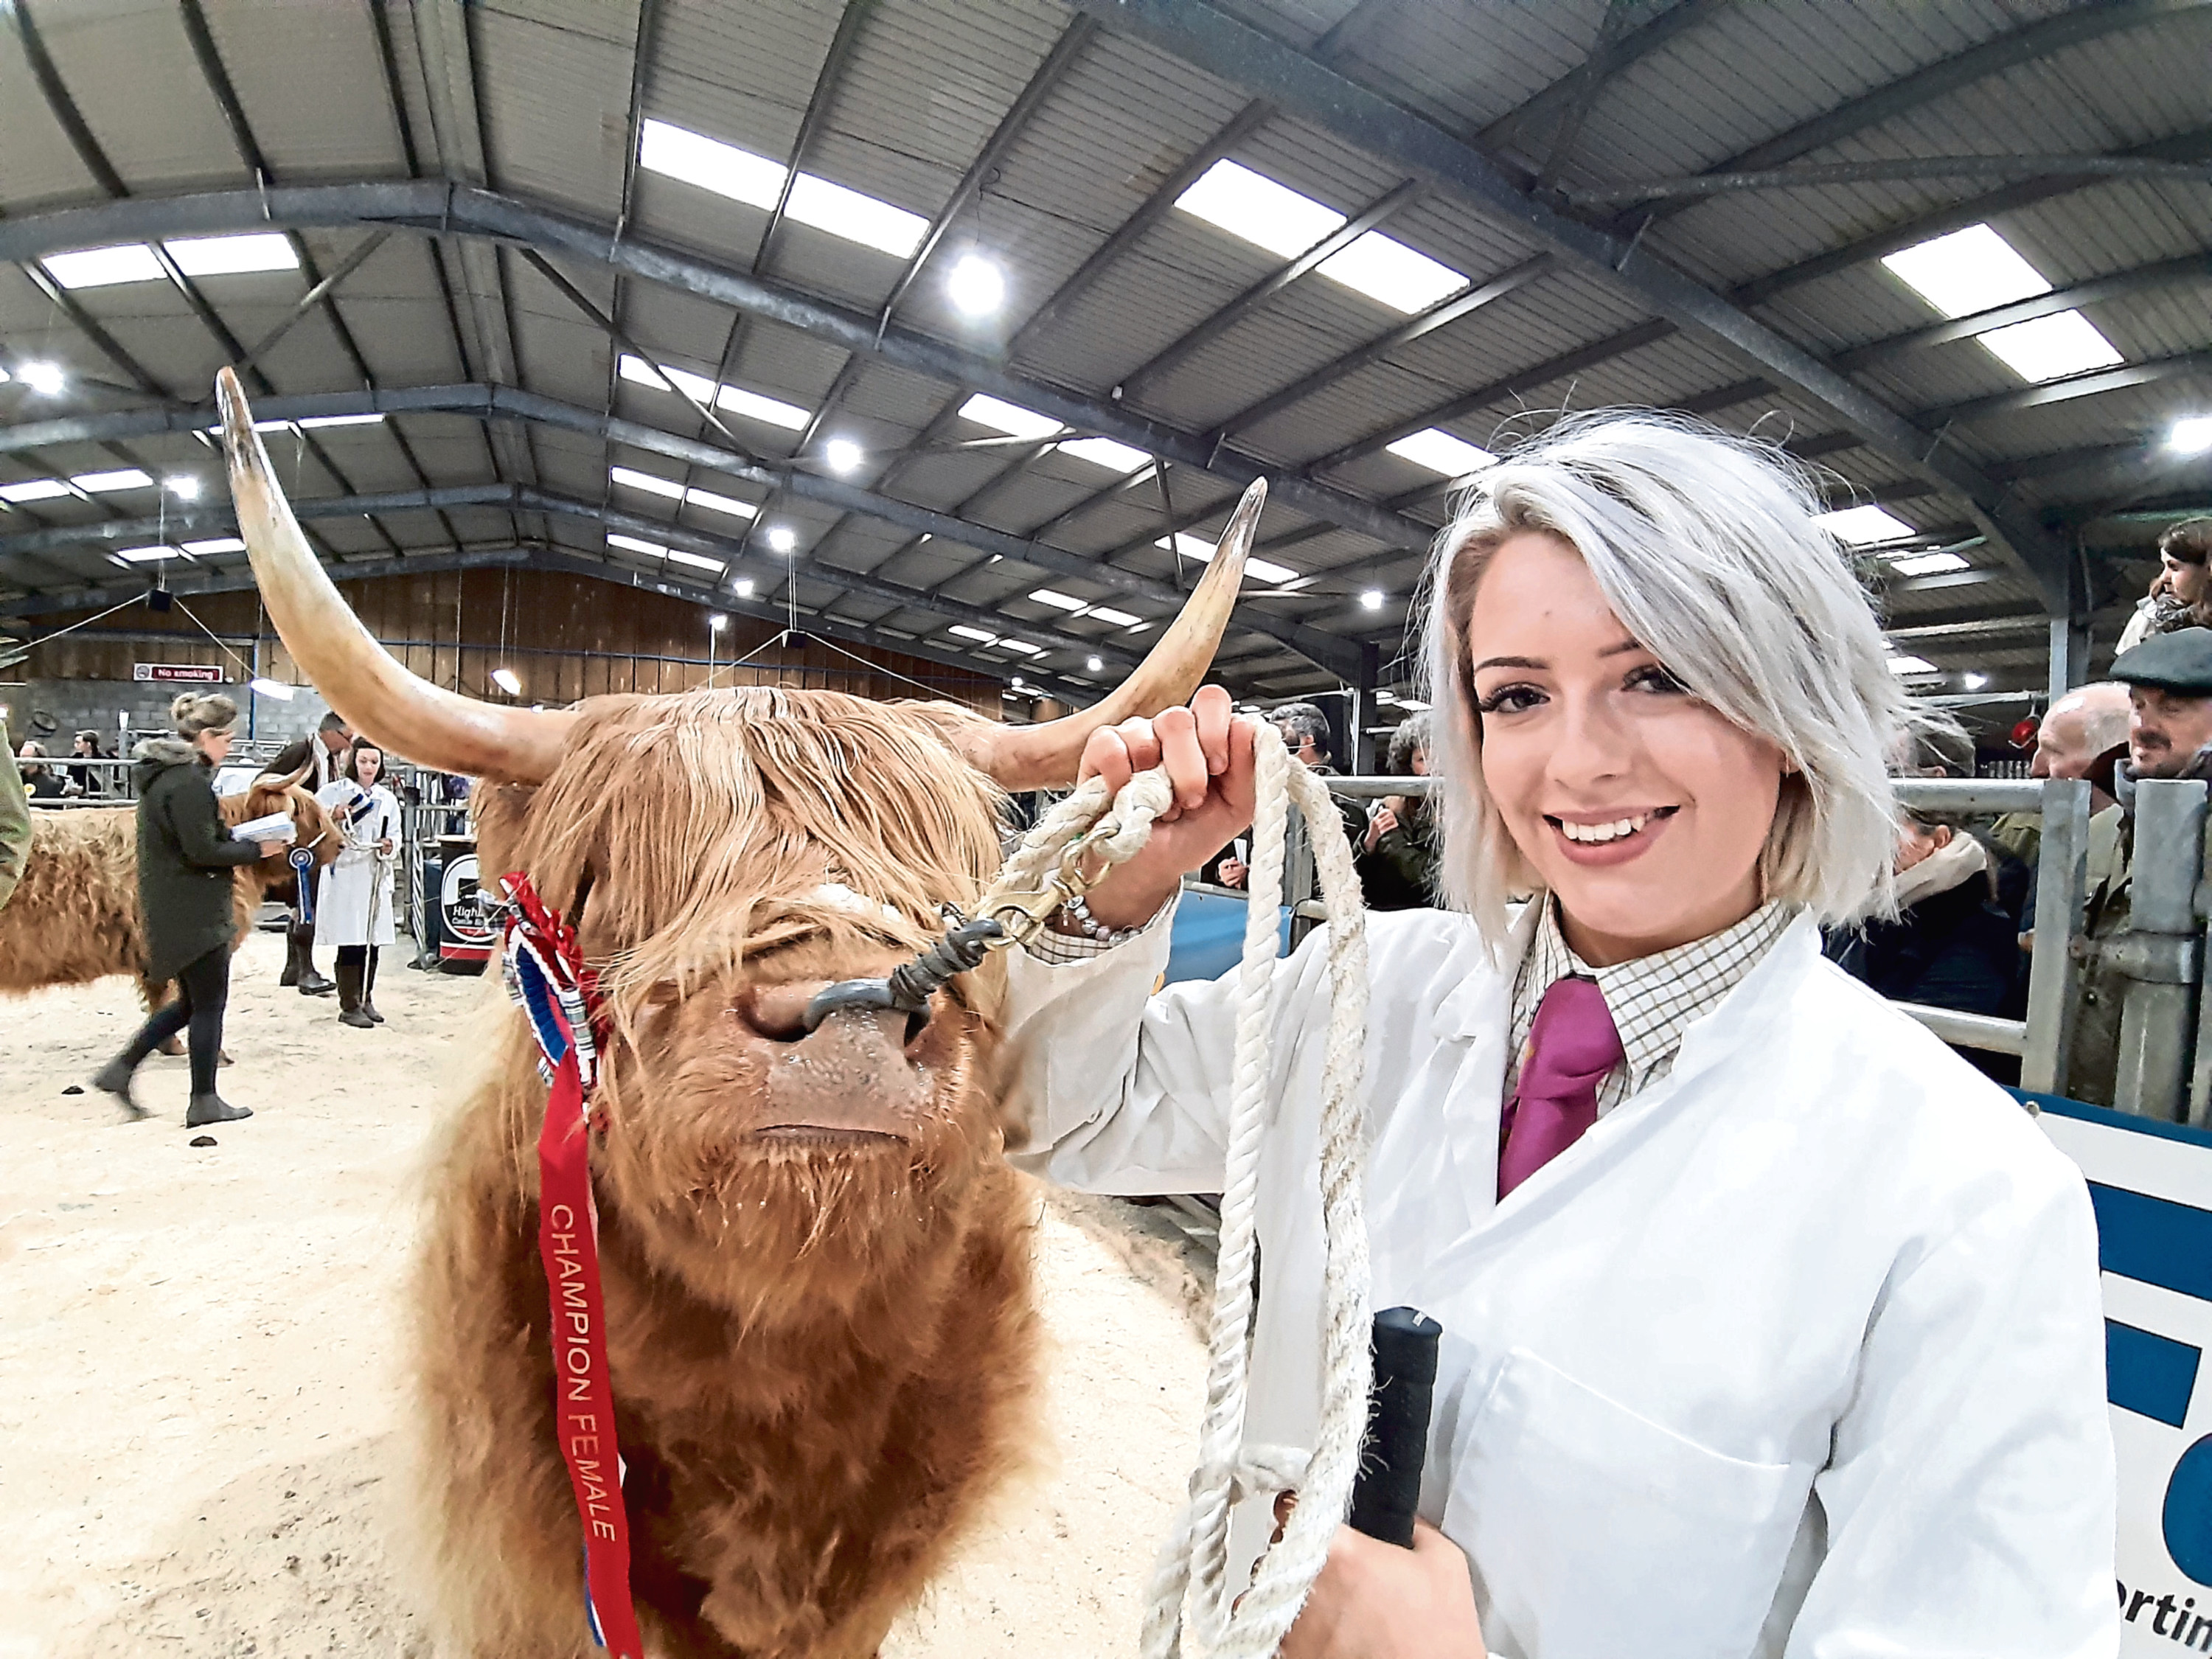 Sarah Noble from Tordarroch, Farr, Inverness with the Oban Highland cattle champion, Heather 12th of Tordarroch